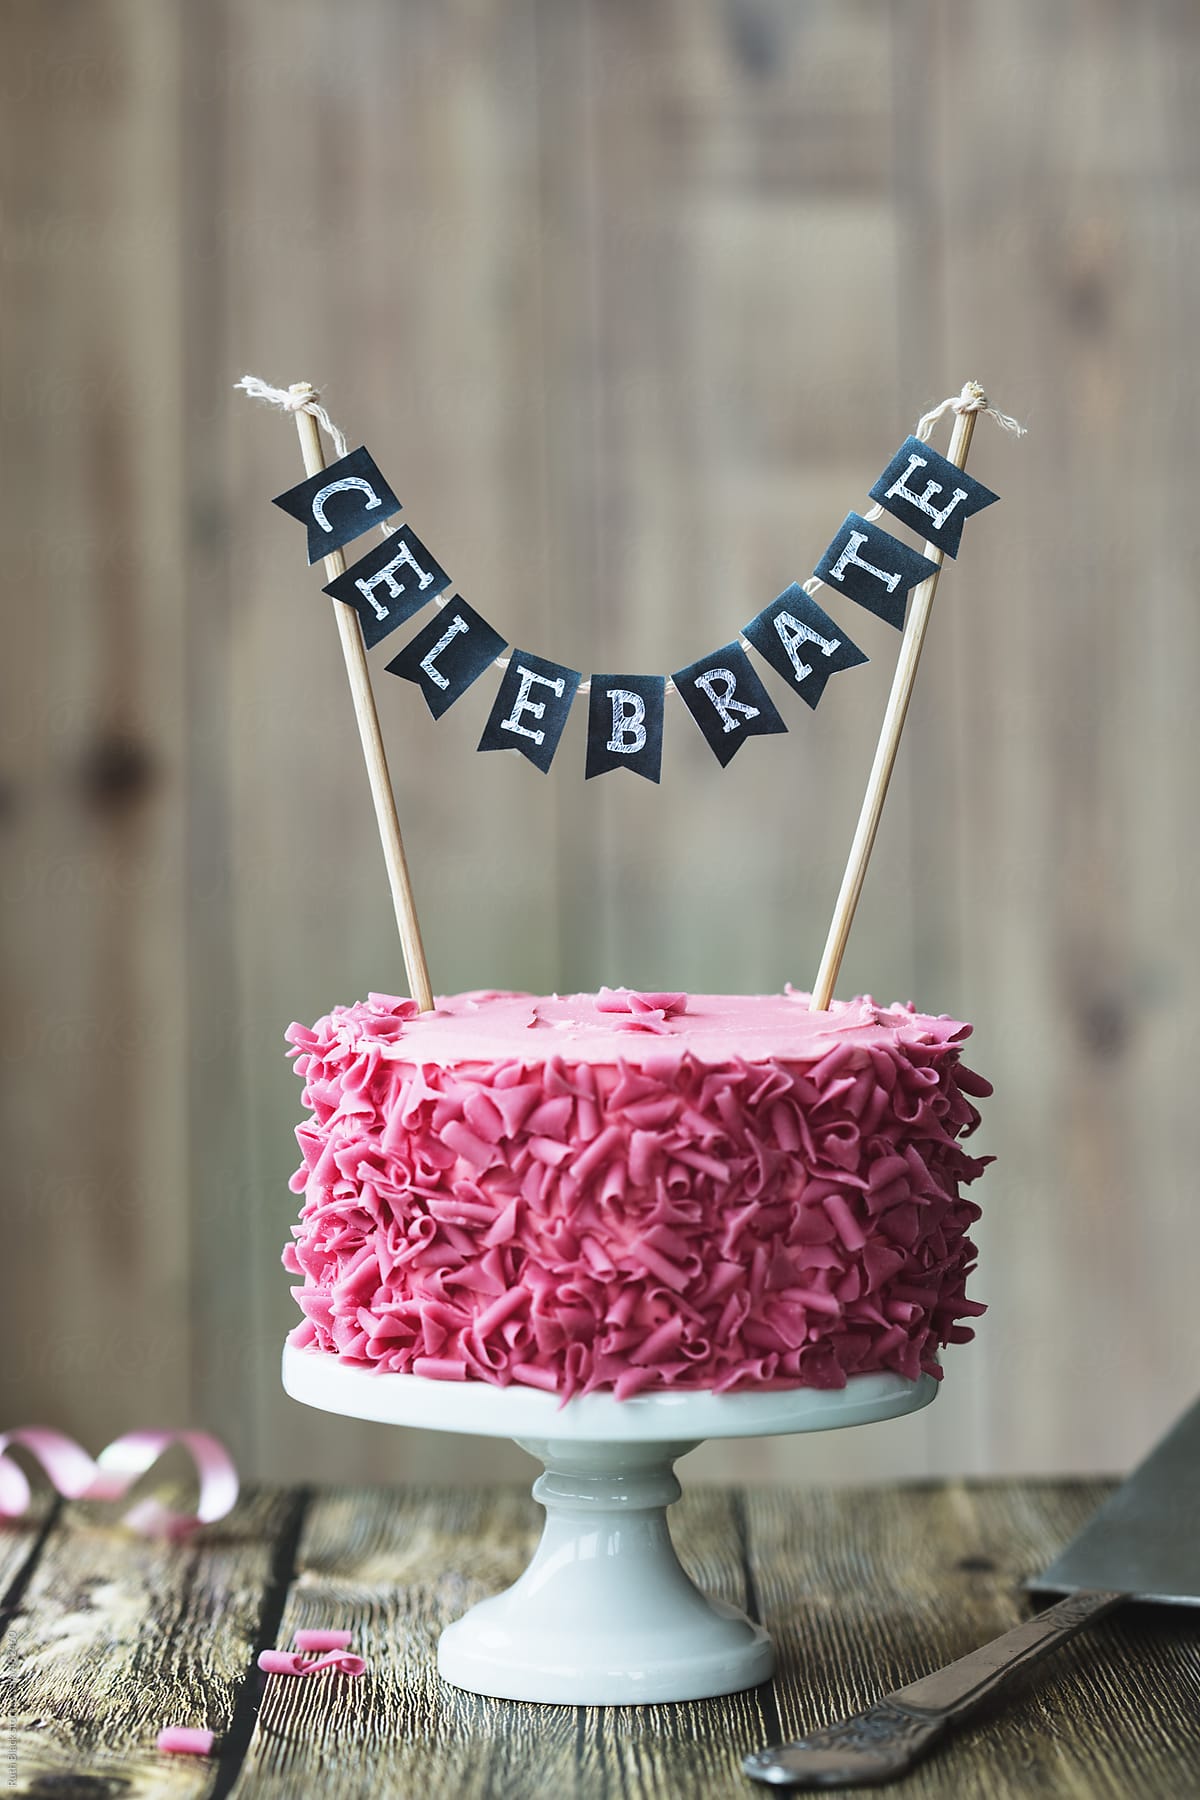 Cake with pink chocolate curls and  banner reading 